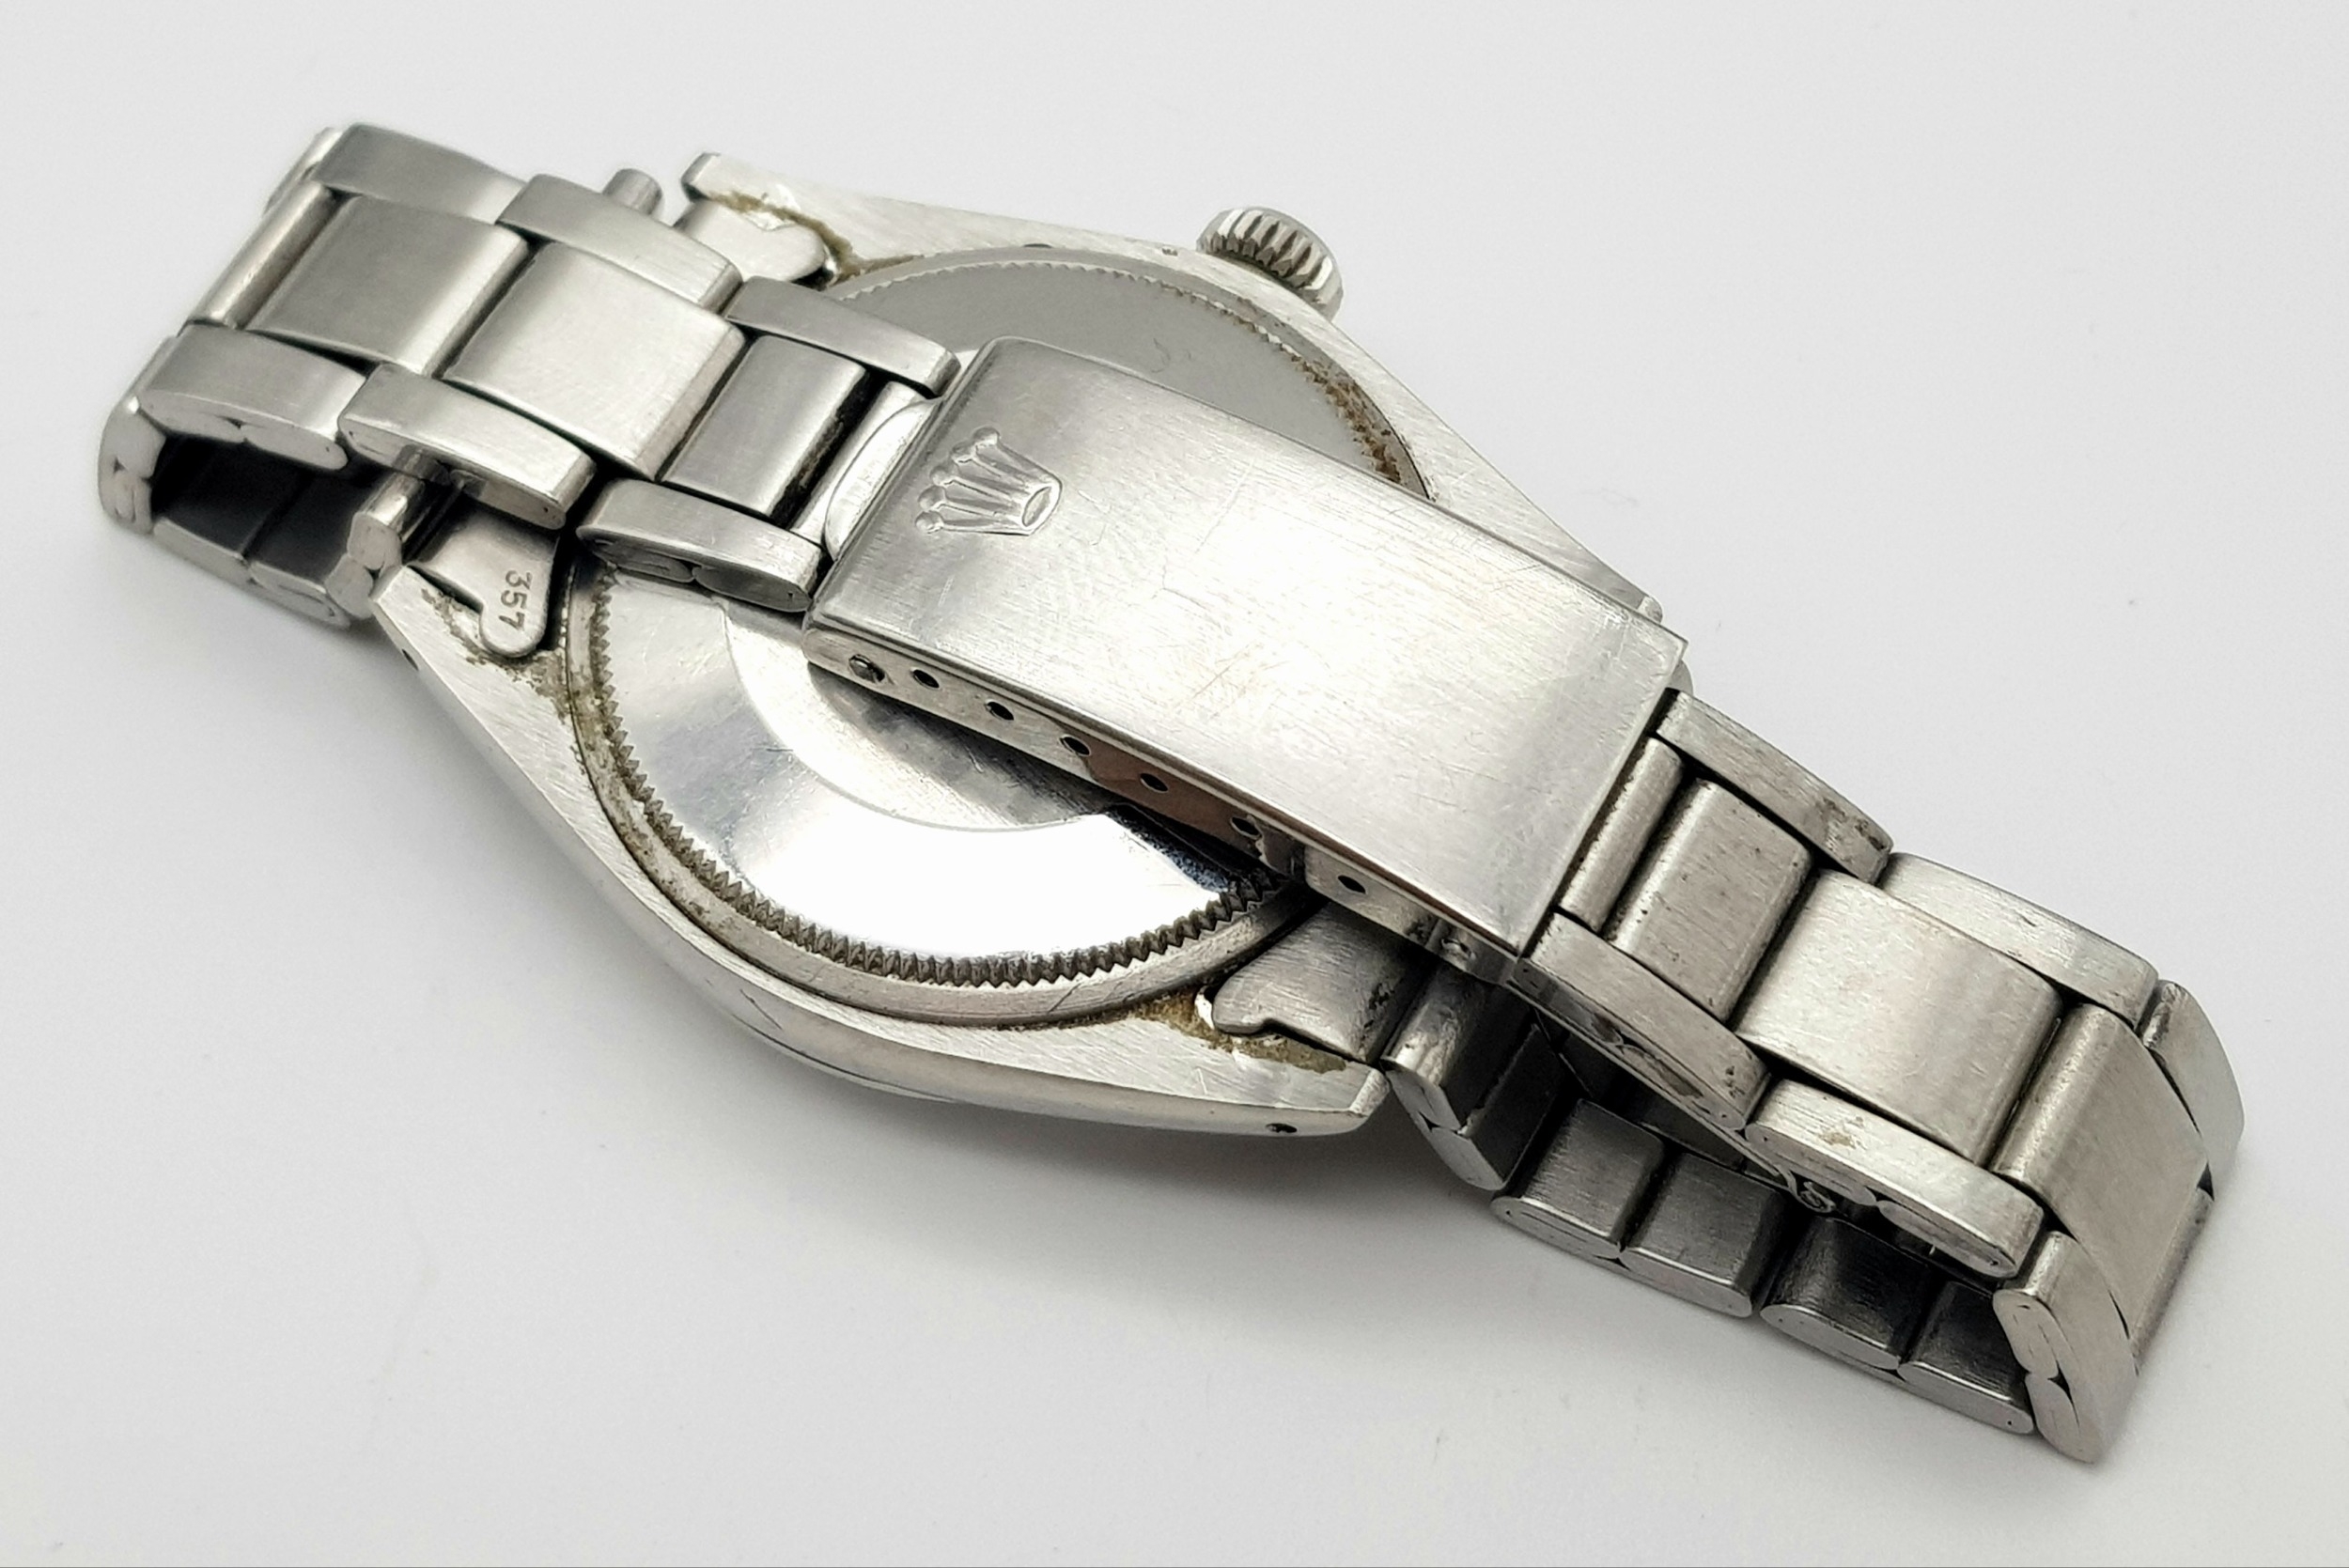 A Vintage Rolex Air King Mid Size Automatic Watch. Stainless steel bracelet and case - 35mm. - Image 5 of 8